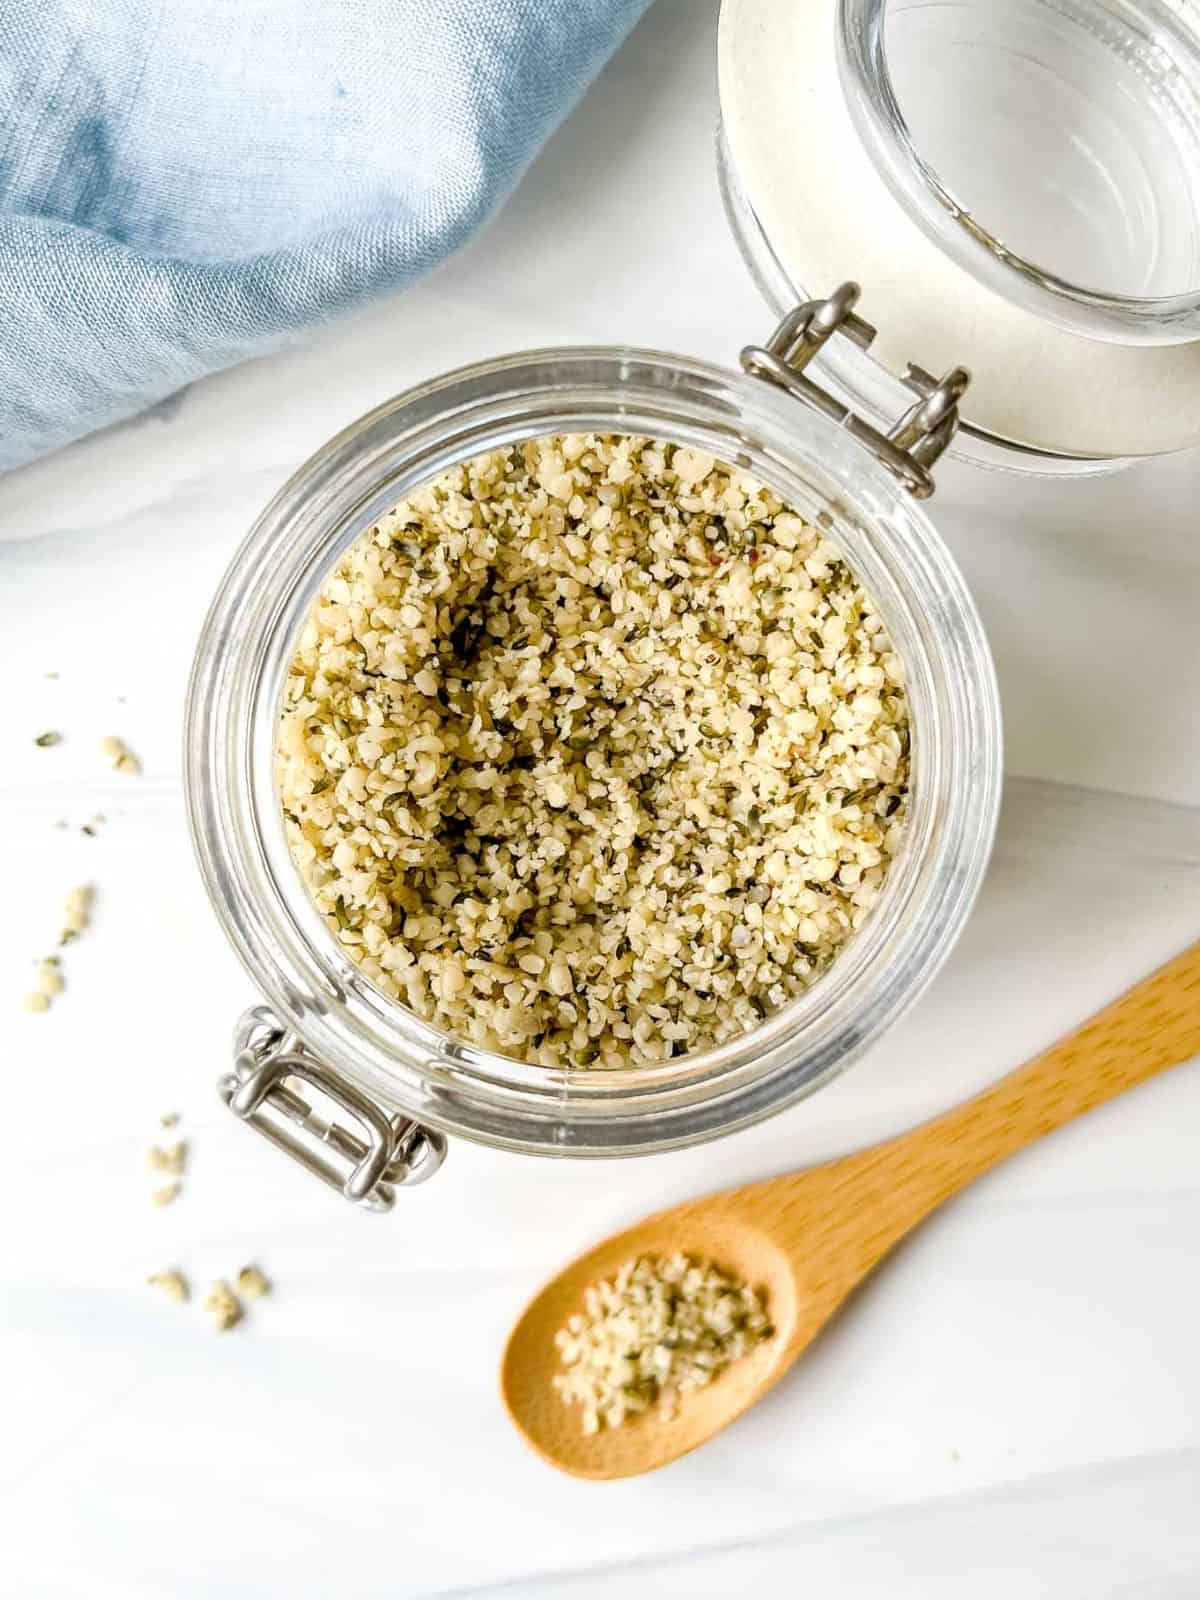 hemp seeds in a glass jar next to a blue cloth and spoonful of seeds.